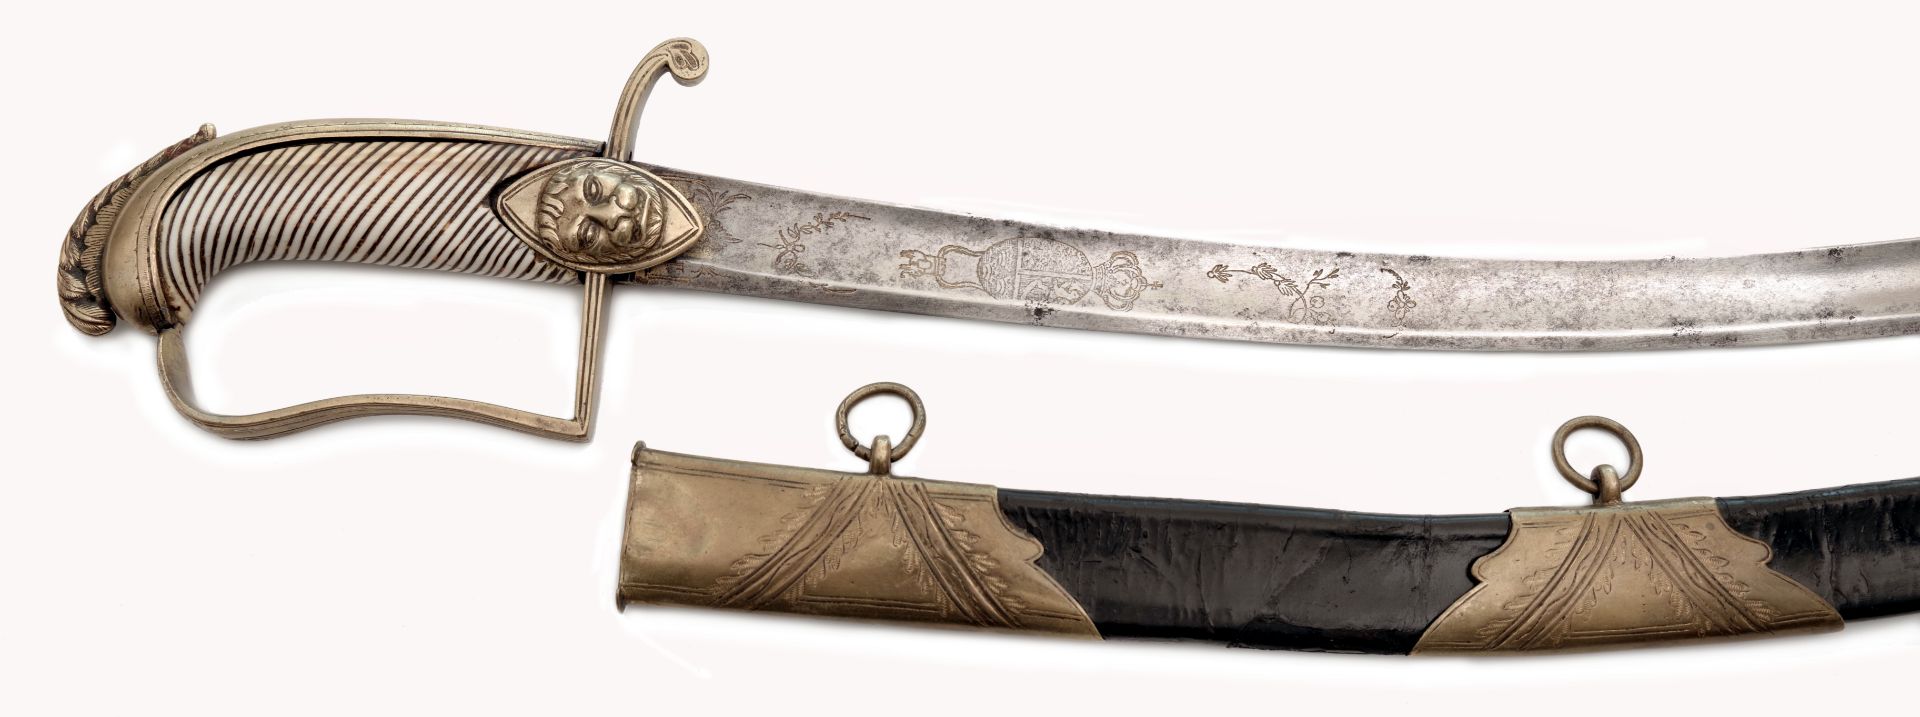 Danish-Norwegian sabre of a senior office from the Napoleonic era - Image 2 of 6